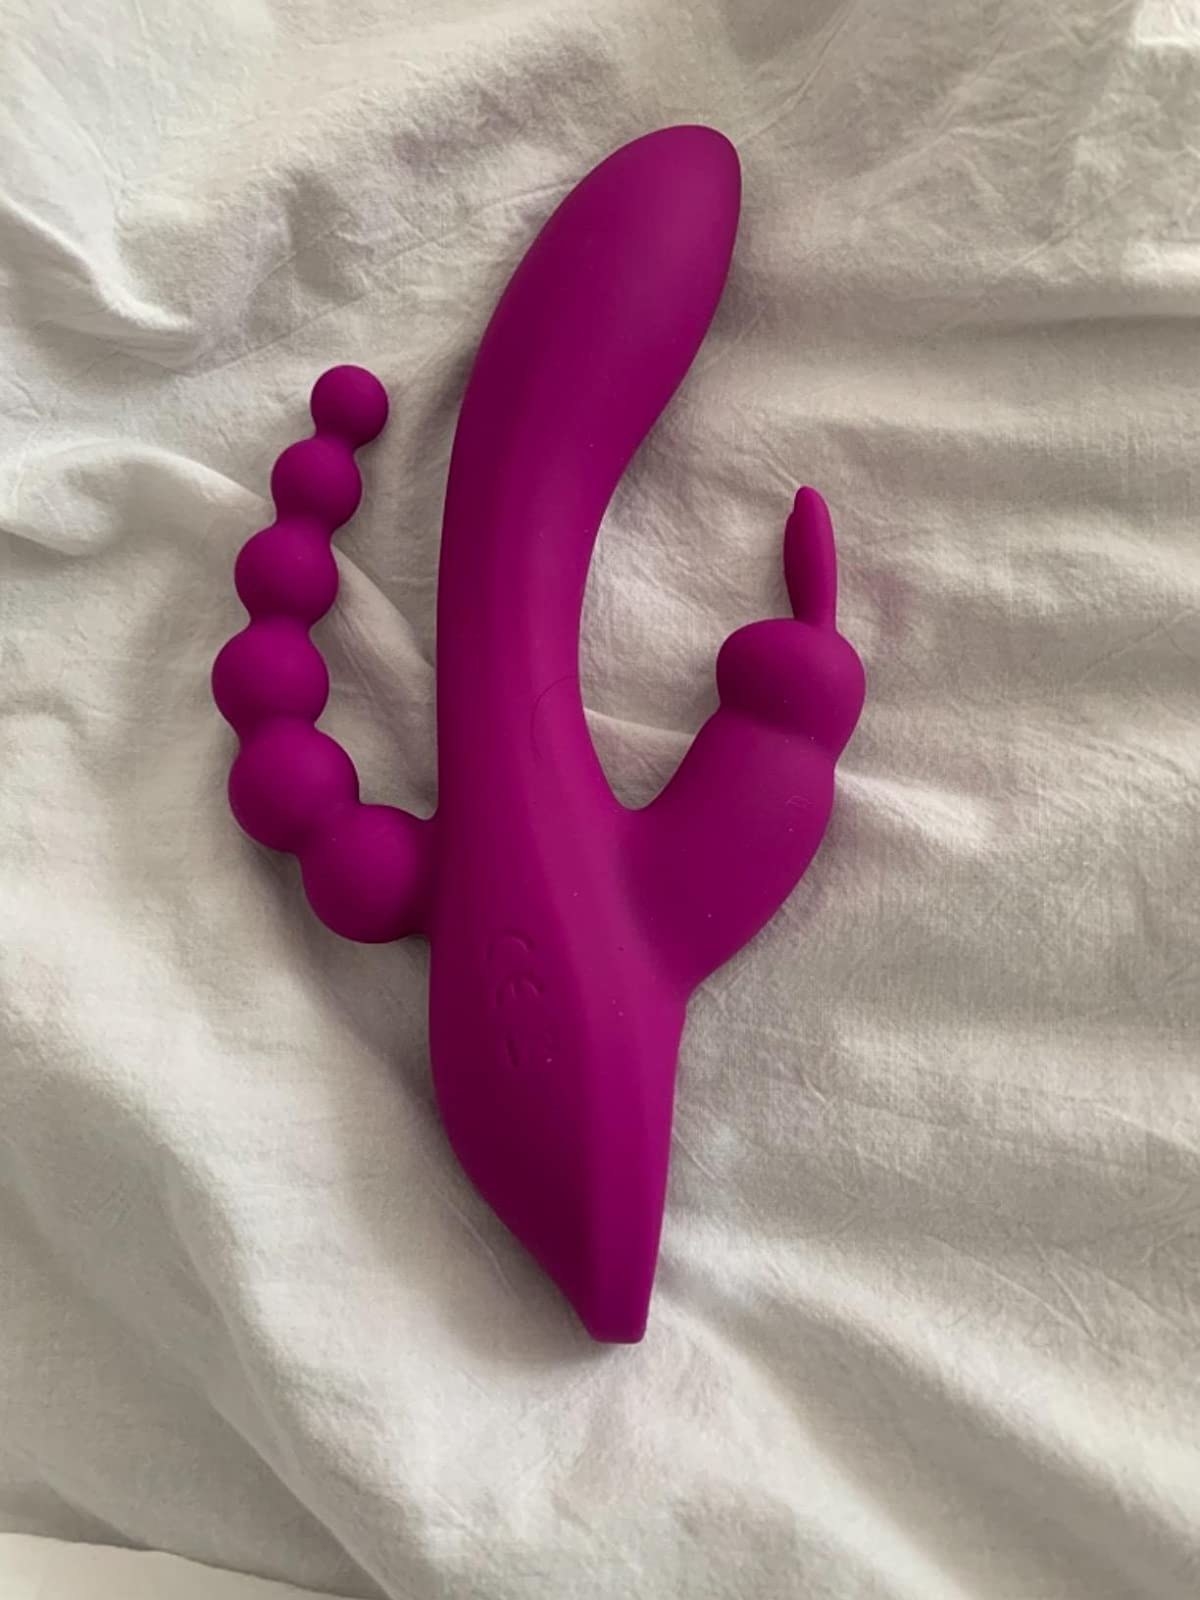 Pink vibrator with anal beads, clitoral ears and g-spot shaft